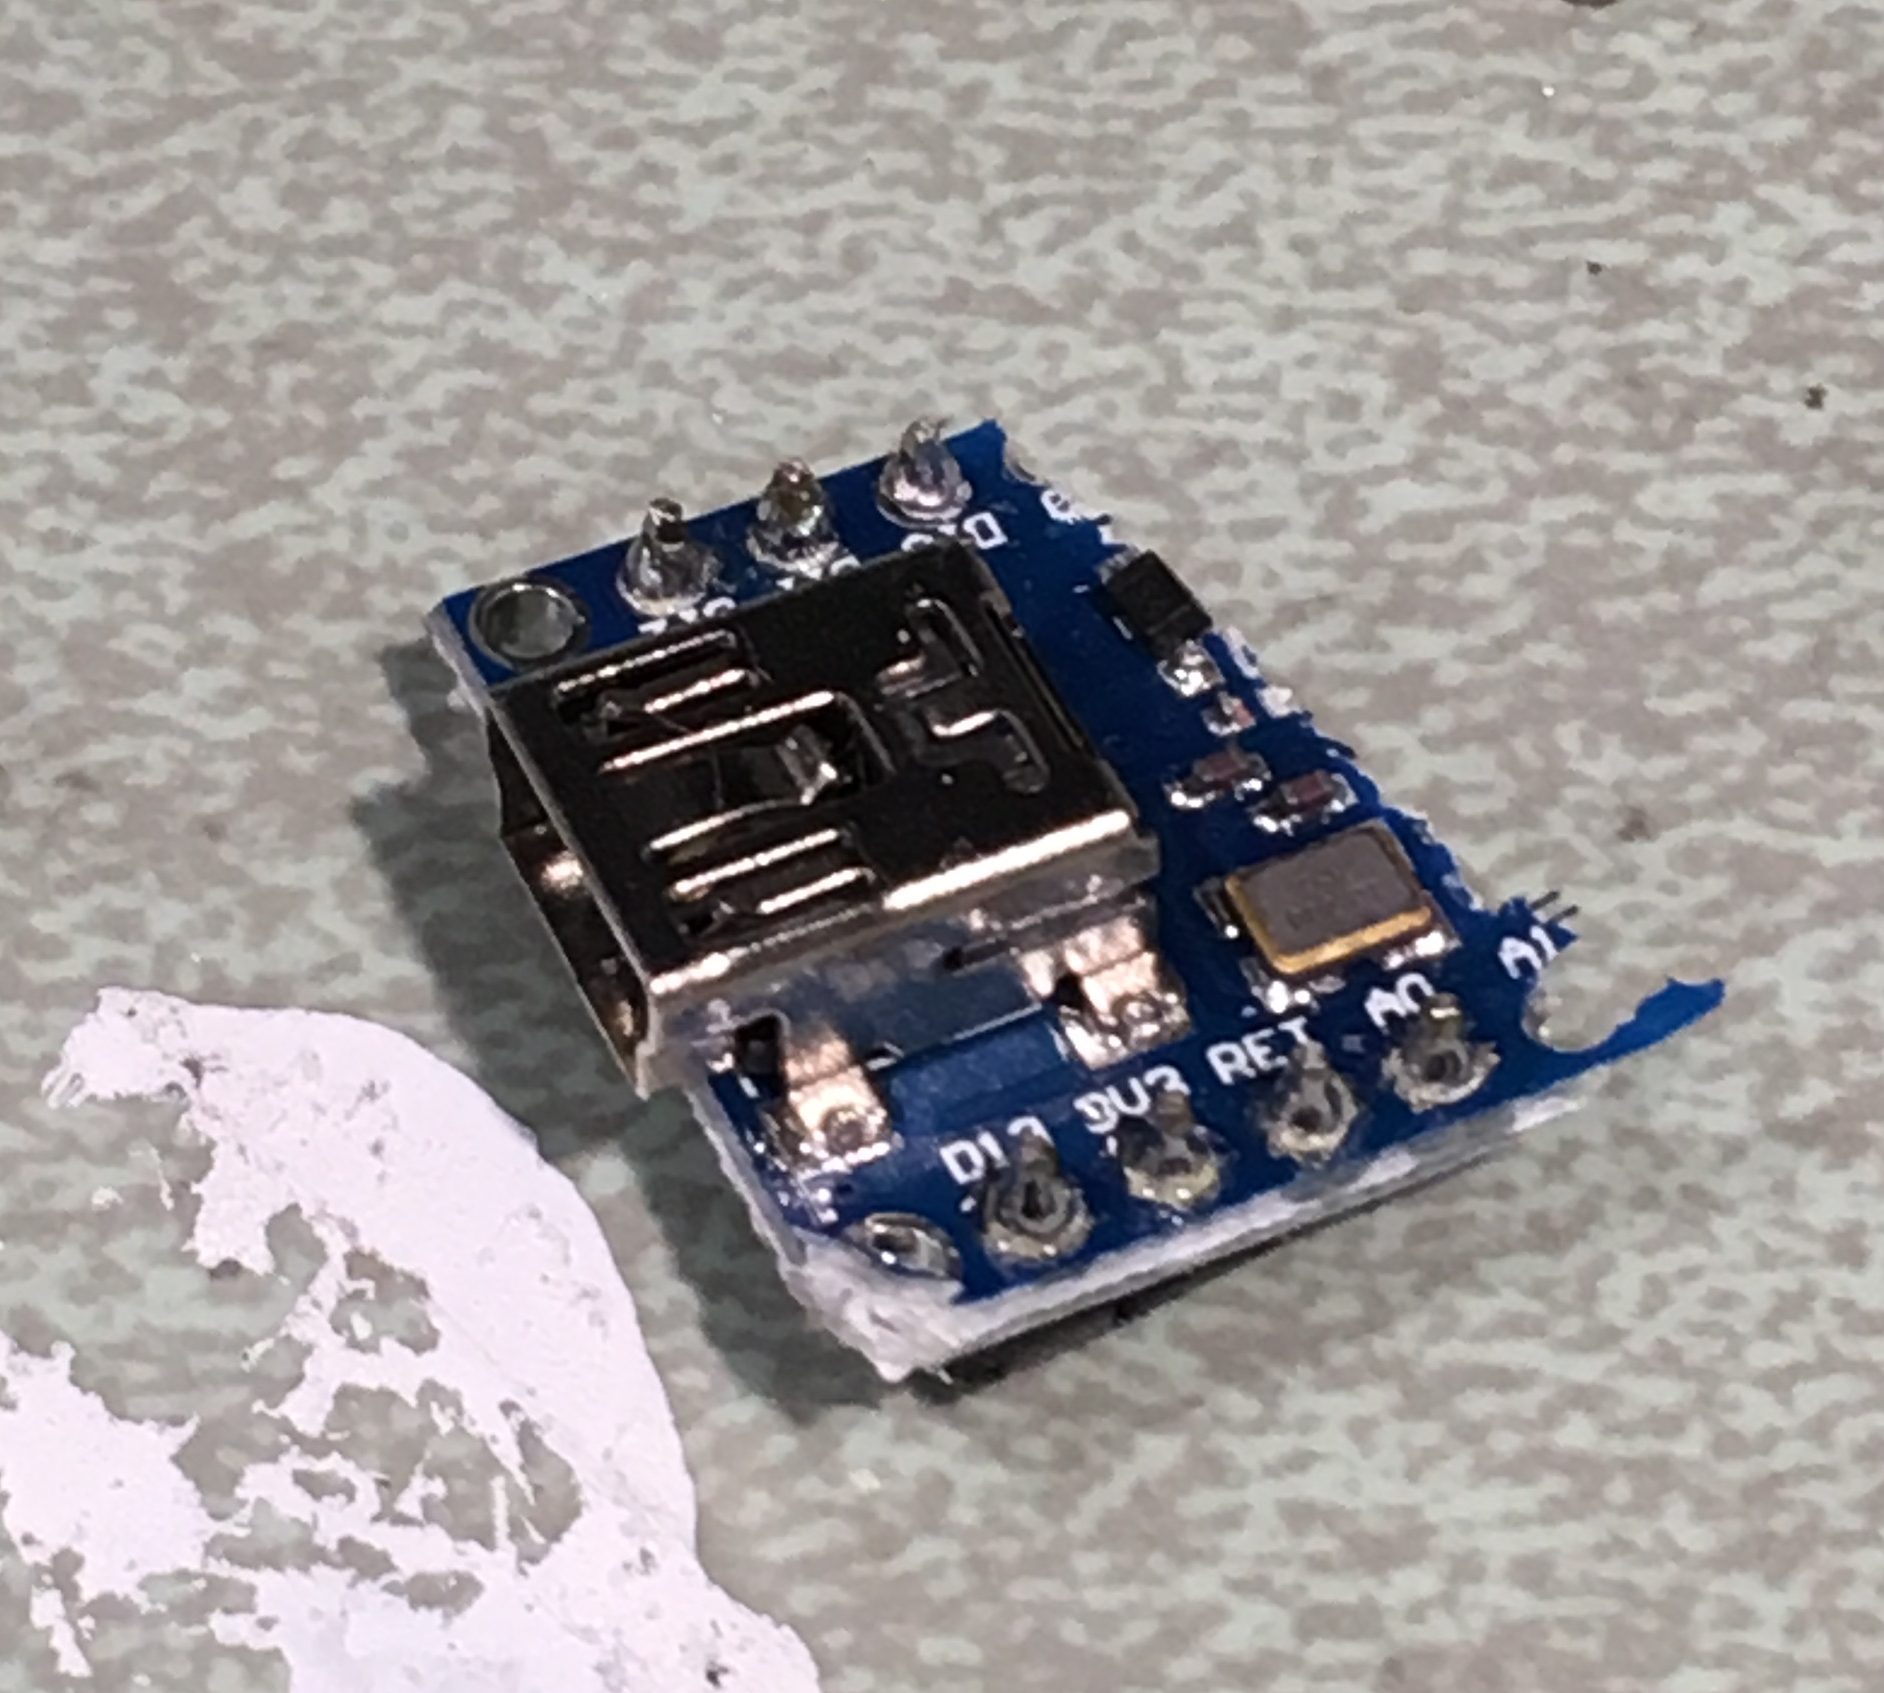 This is the head of a beheaded Arduino Nano. We soldered an arduino nano onto the second iteration of the main circuit box and ended up having to destroy it because it stopped working. Then, for the second iteration.